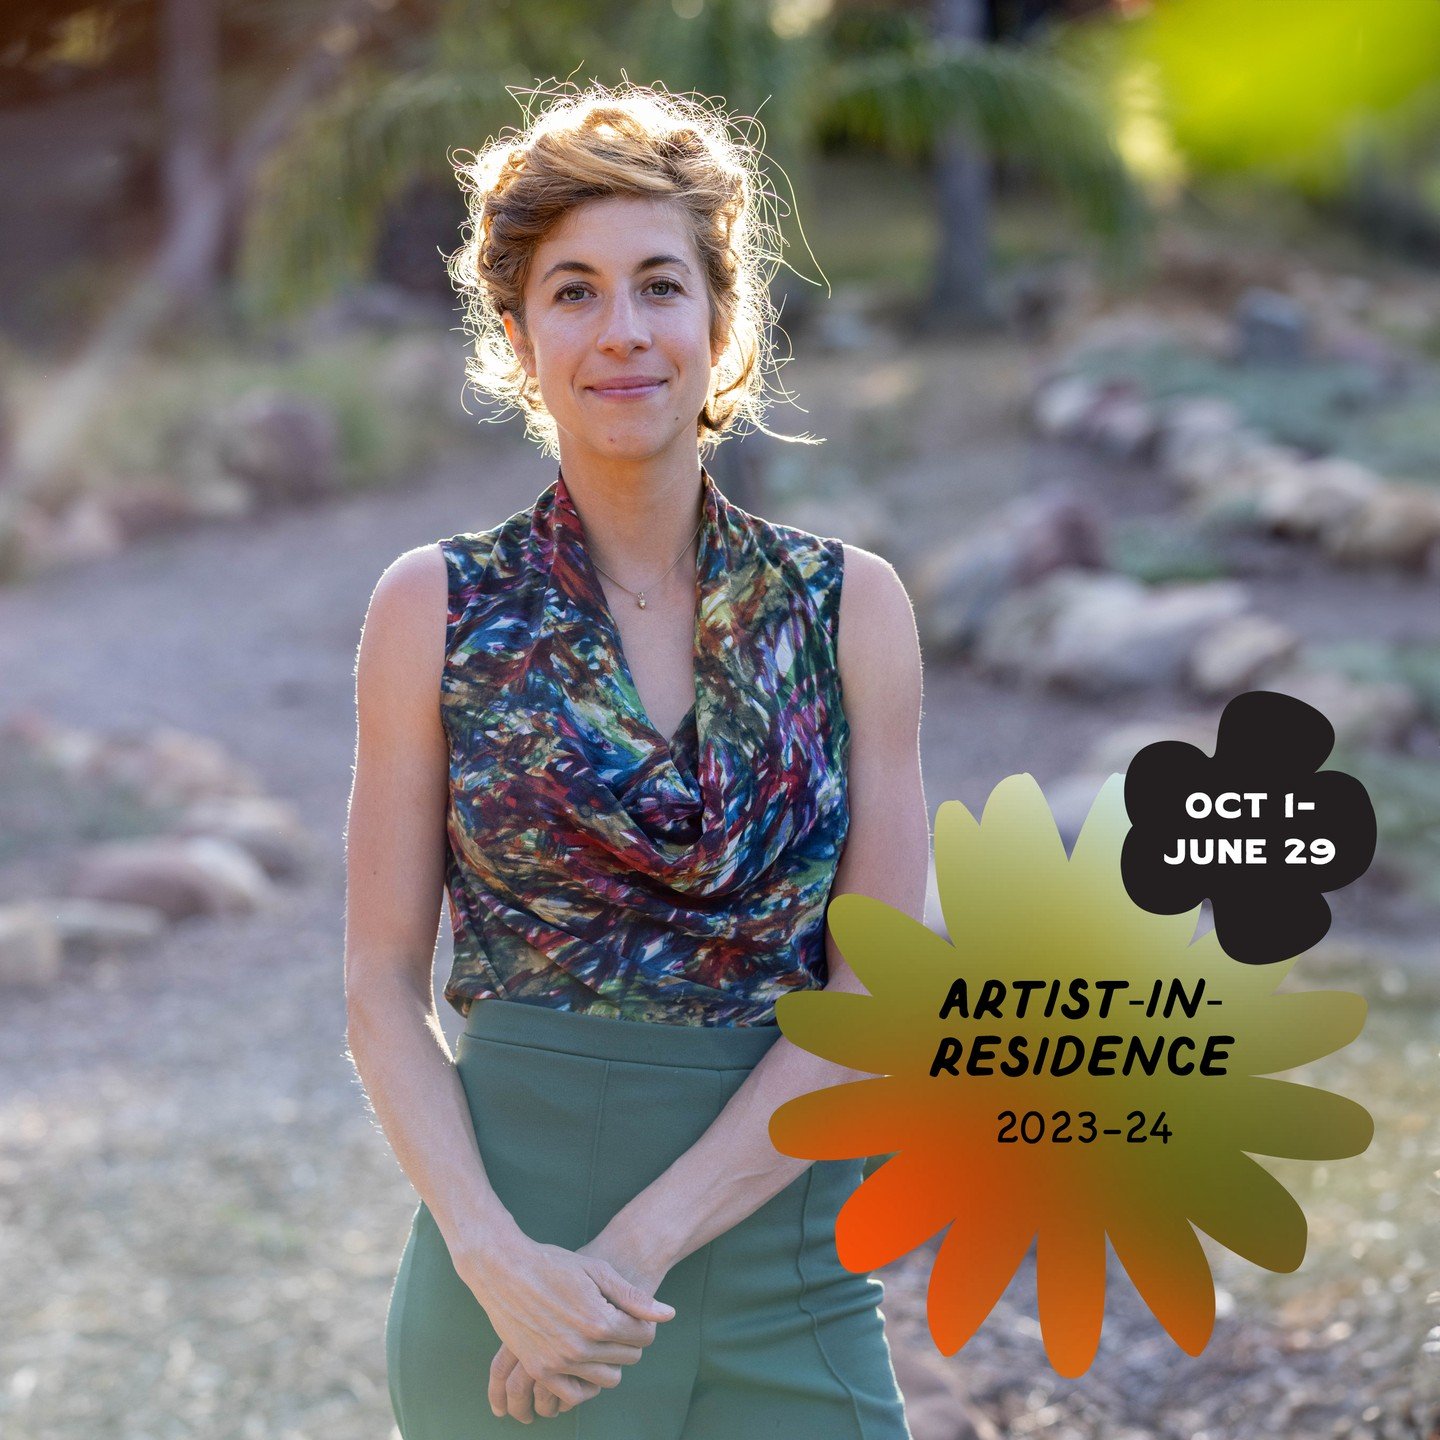 This post marks the culmination of our 2023-24 Art in Nature series. We are proud to re-introduce Rosemary Hall @rosemaryhhall, who joined us last year with a compelling Research Residency proposal focusing on our Pollinator Garden. Her time at Taft 